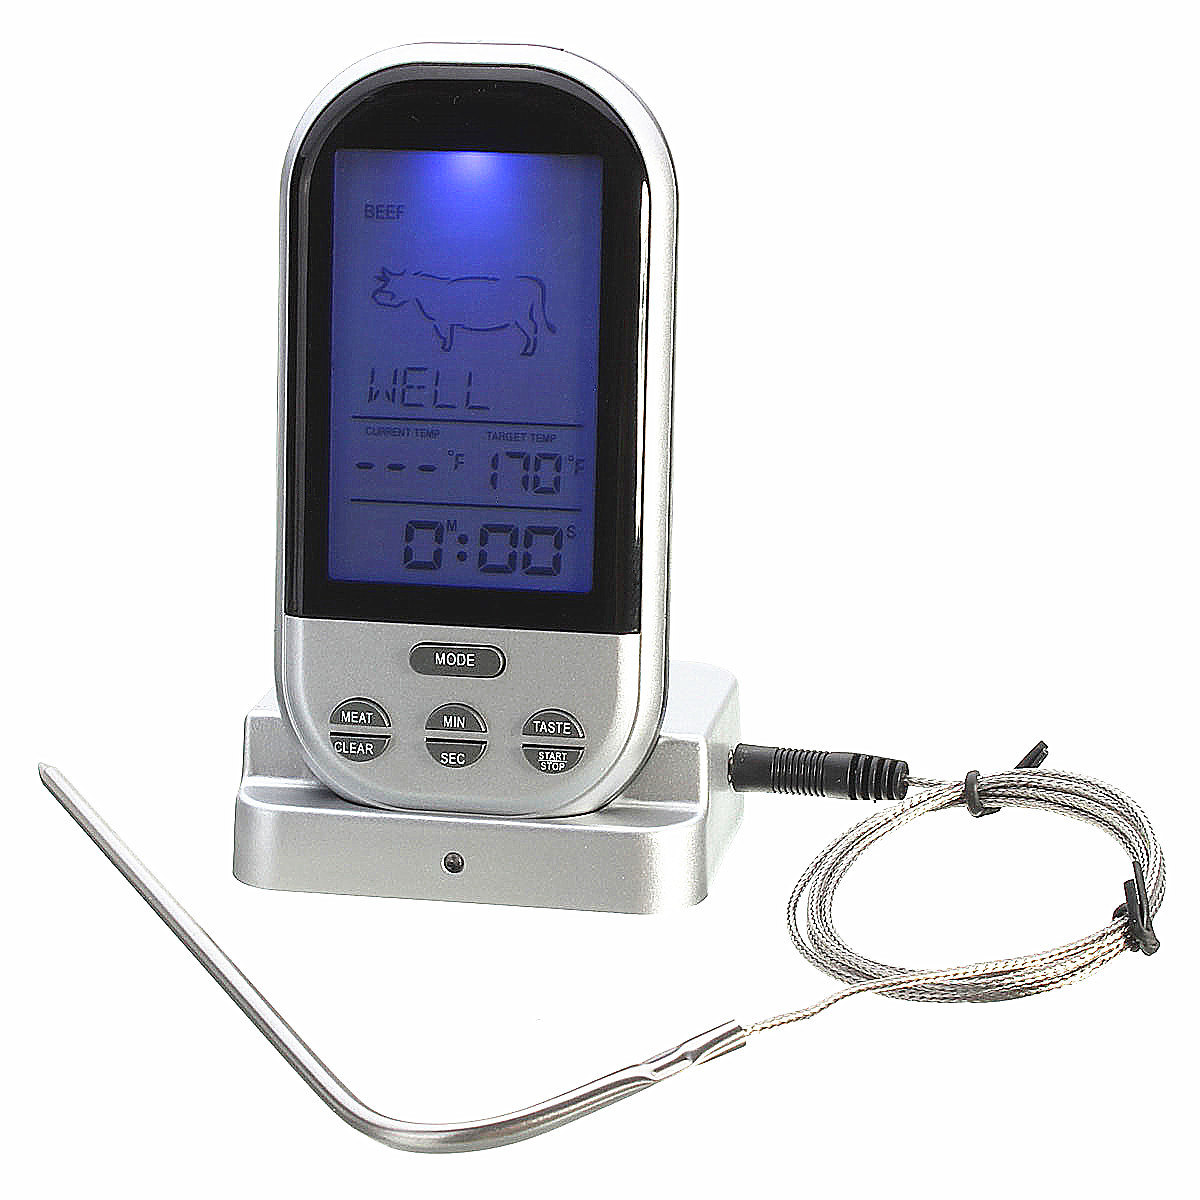 Wireless Remote Control Food Meat BBQ Thermometer Home Kitchen Cooking Oven Thermometer